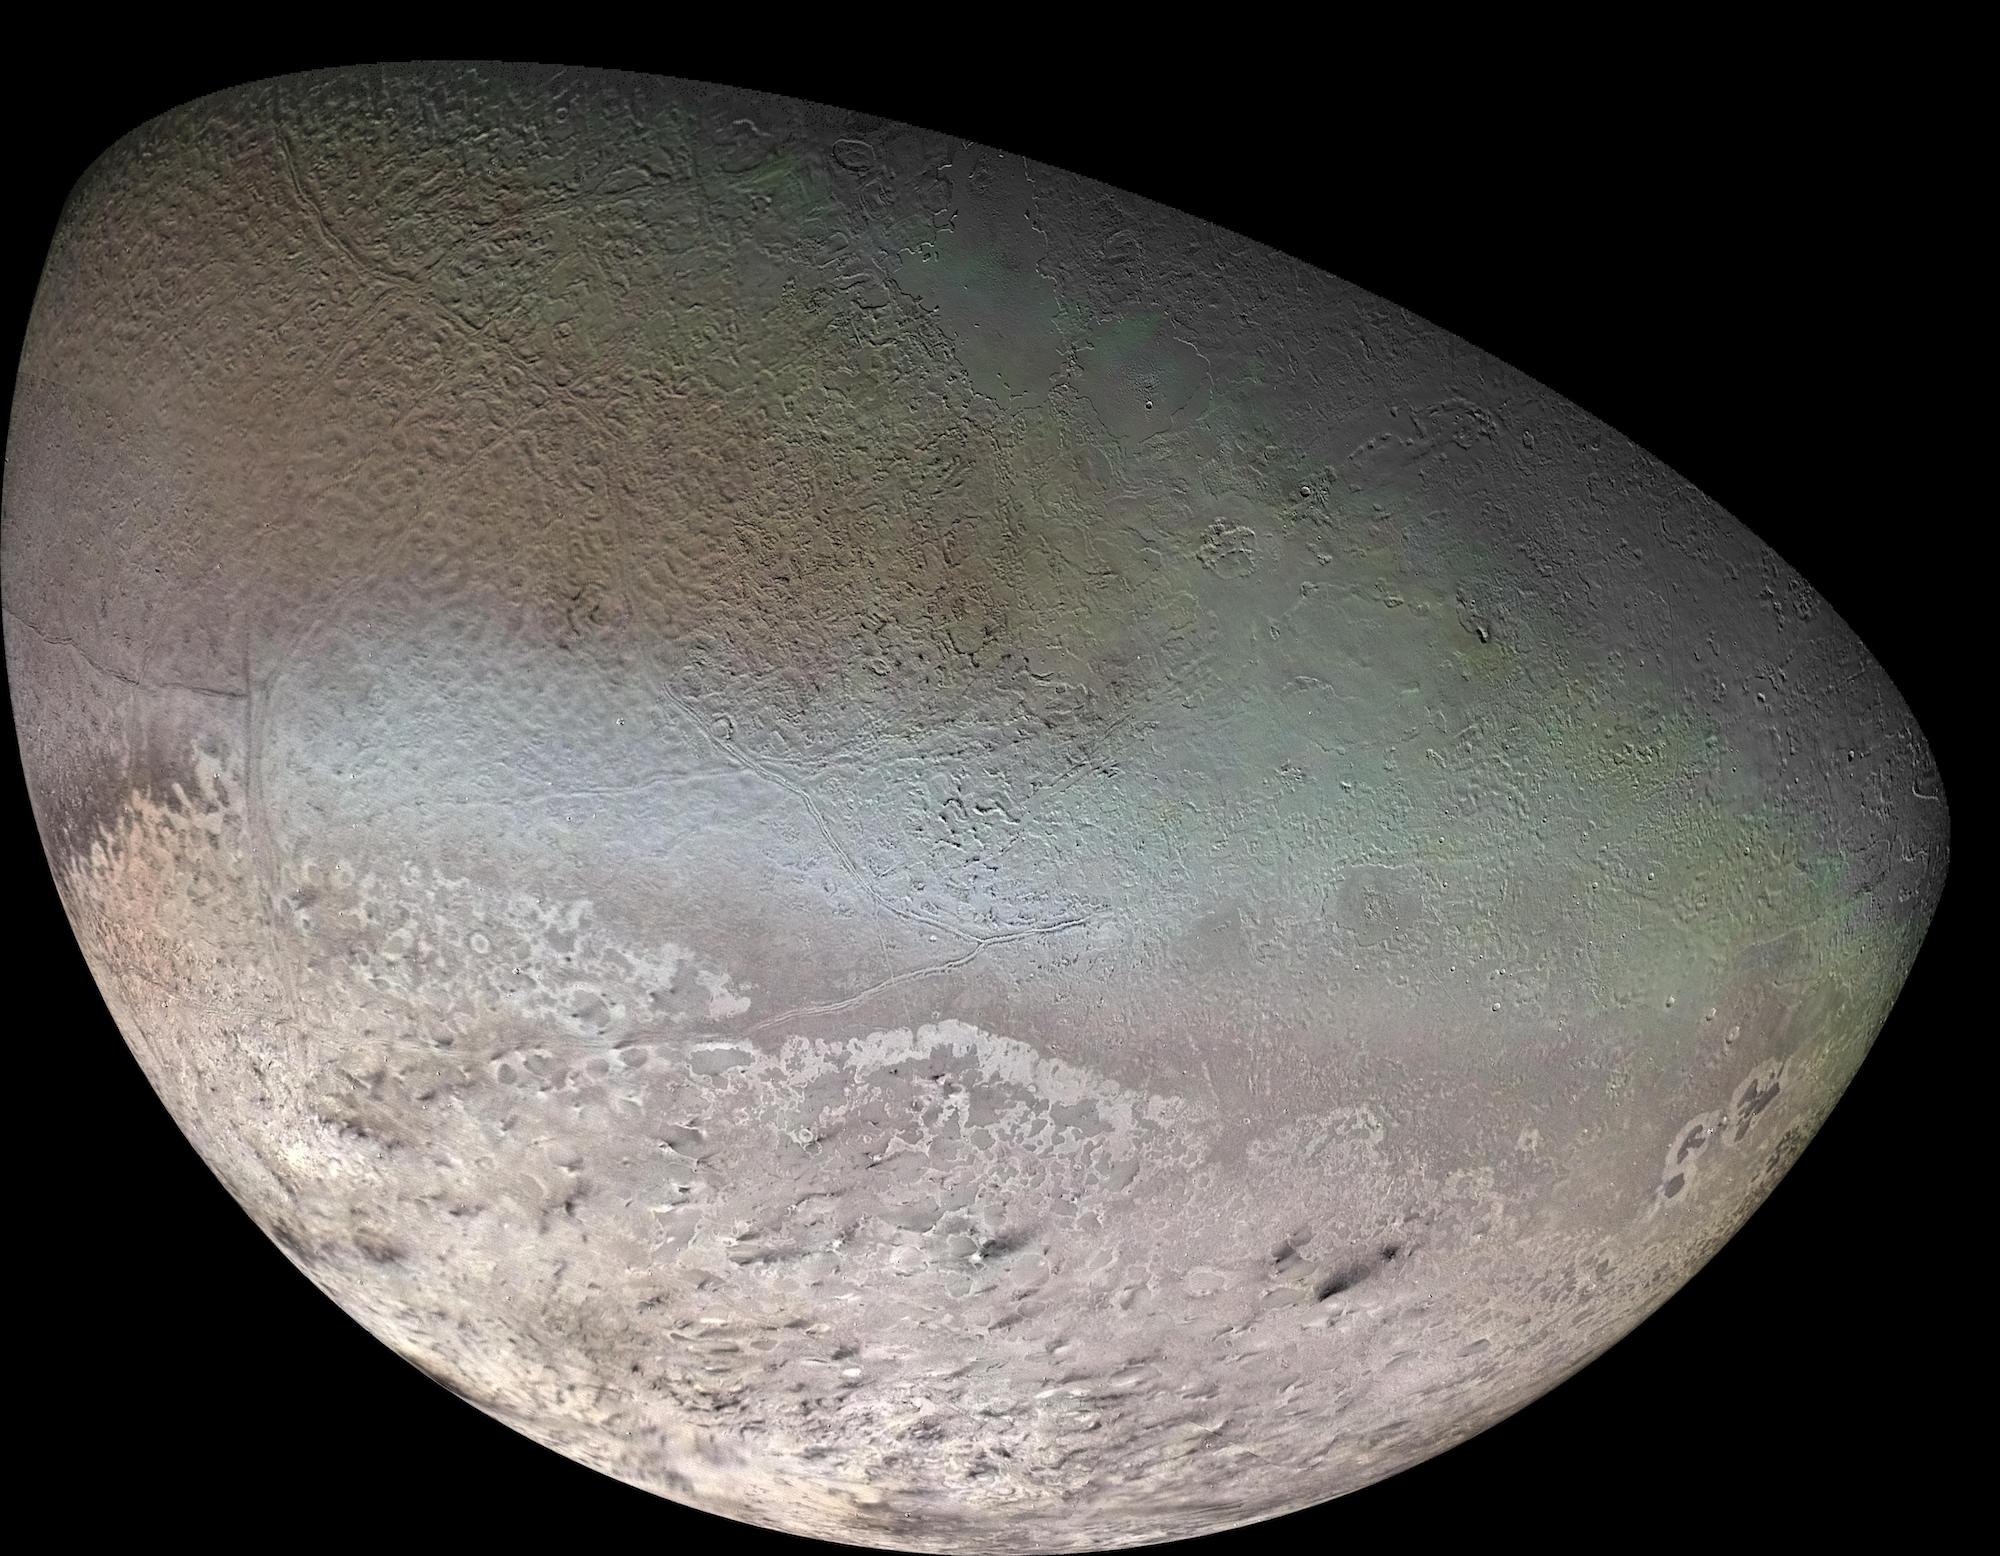 Global color mosaic of Neptune’s moon Triton, taken in 1989 by Voyager 2 as it flew by the Neptune system. Triton may have a liquid water ocean beneath its surface and has active plumes that appear as dark black streaks near the bottom of this image.  Credit: NASA/JPL/U.S. Geological Survey